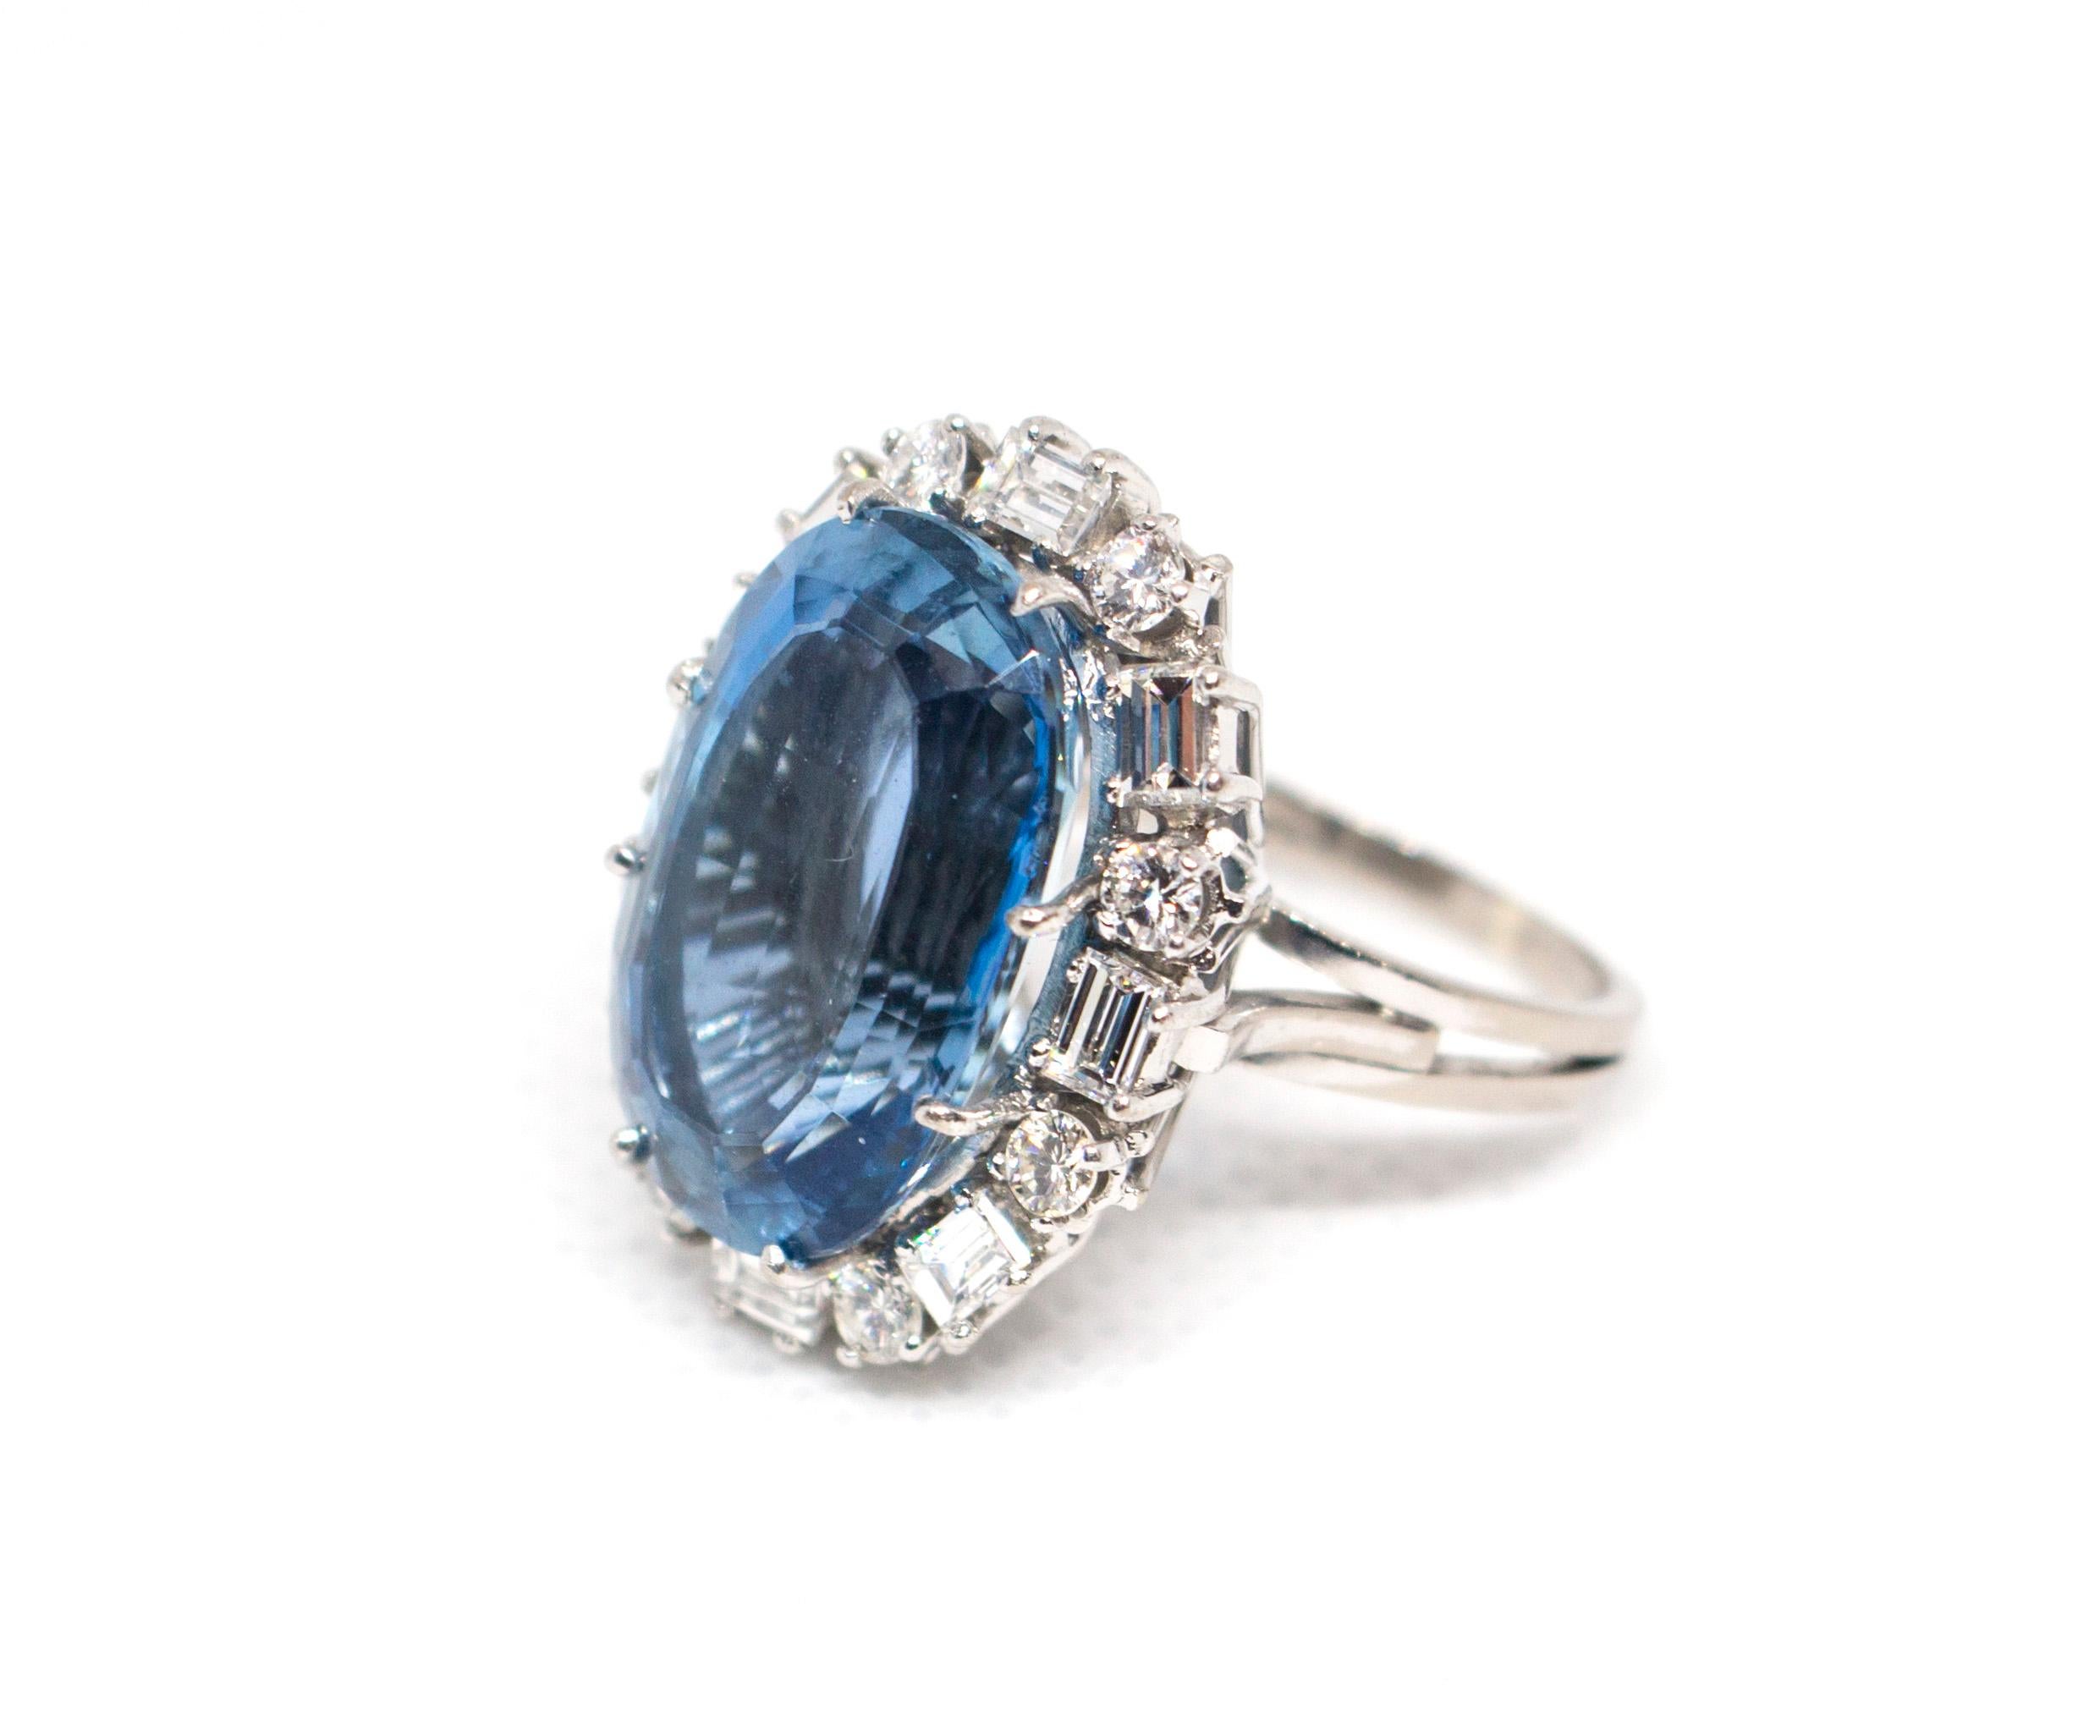 An 18 Karat White Gold, Aquamarine and Diamond Ring, 
containing one oval step cut aquamarine weighing approximately 11.00 carats, eight round brilliant cut diamonds weighing approximately 0.48 carat total, VS1-VS2 clarity, E-F color  and eight